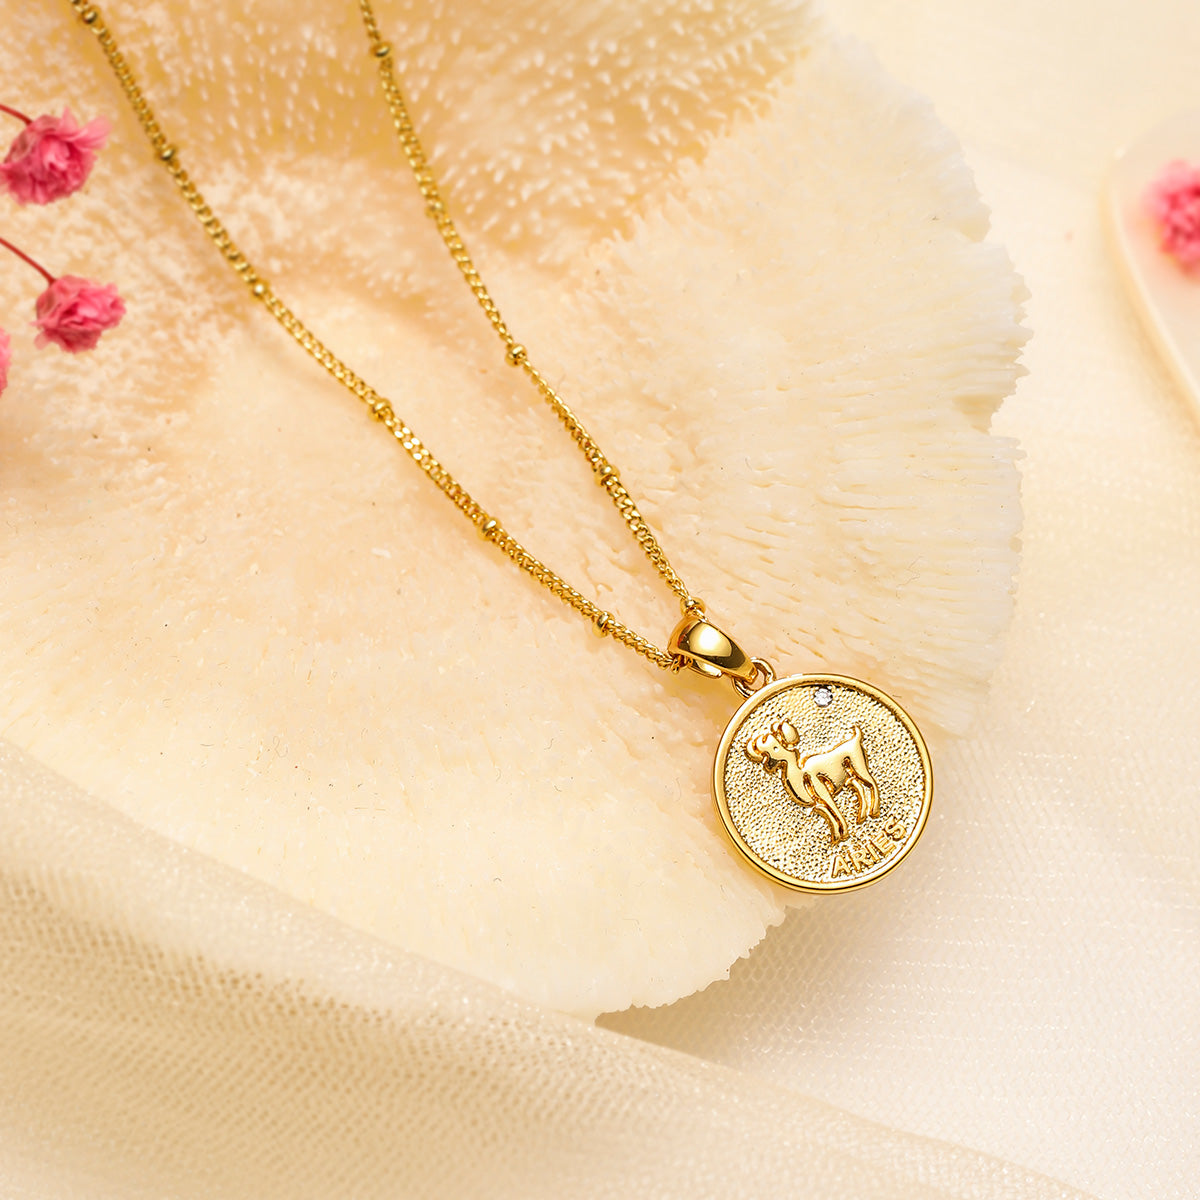 Aries Constellation Coin Pendant Statement Necklace